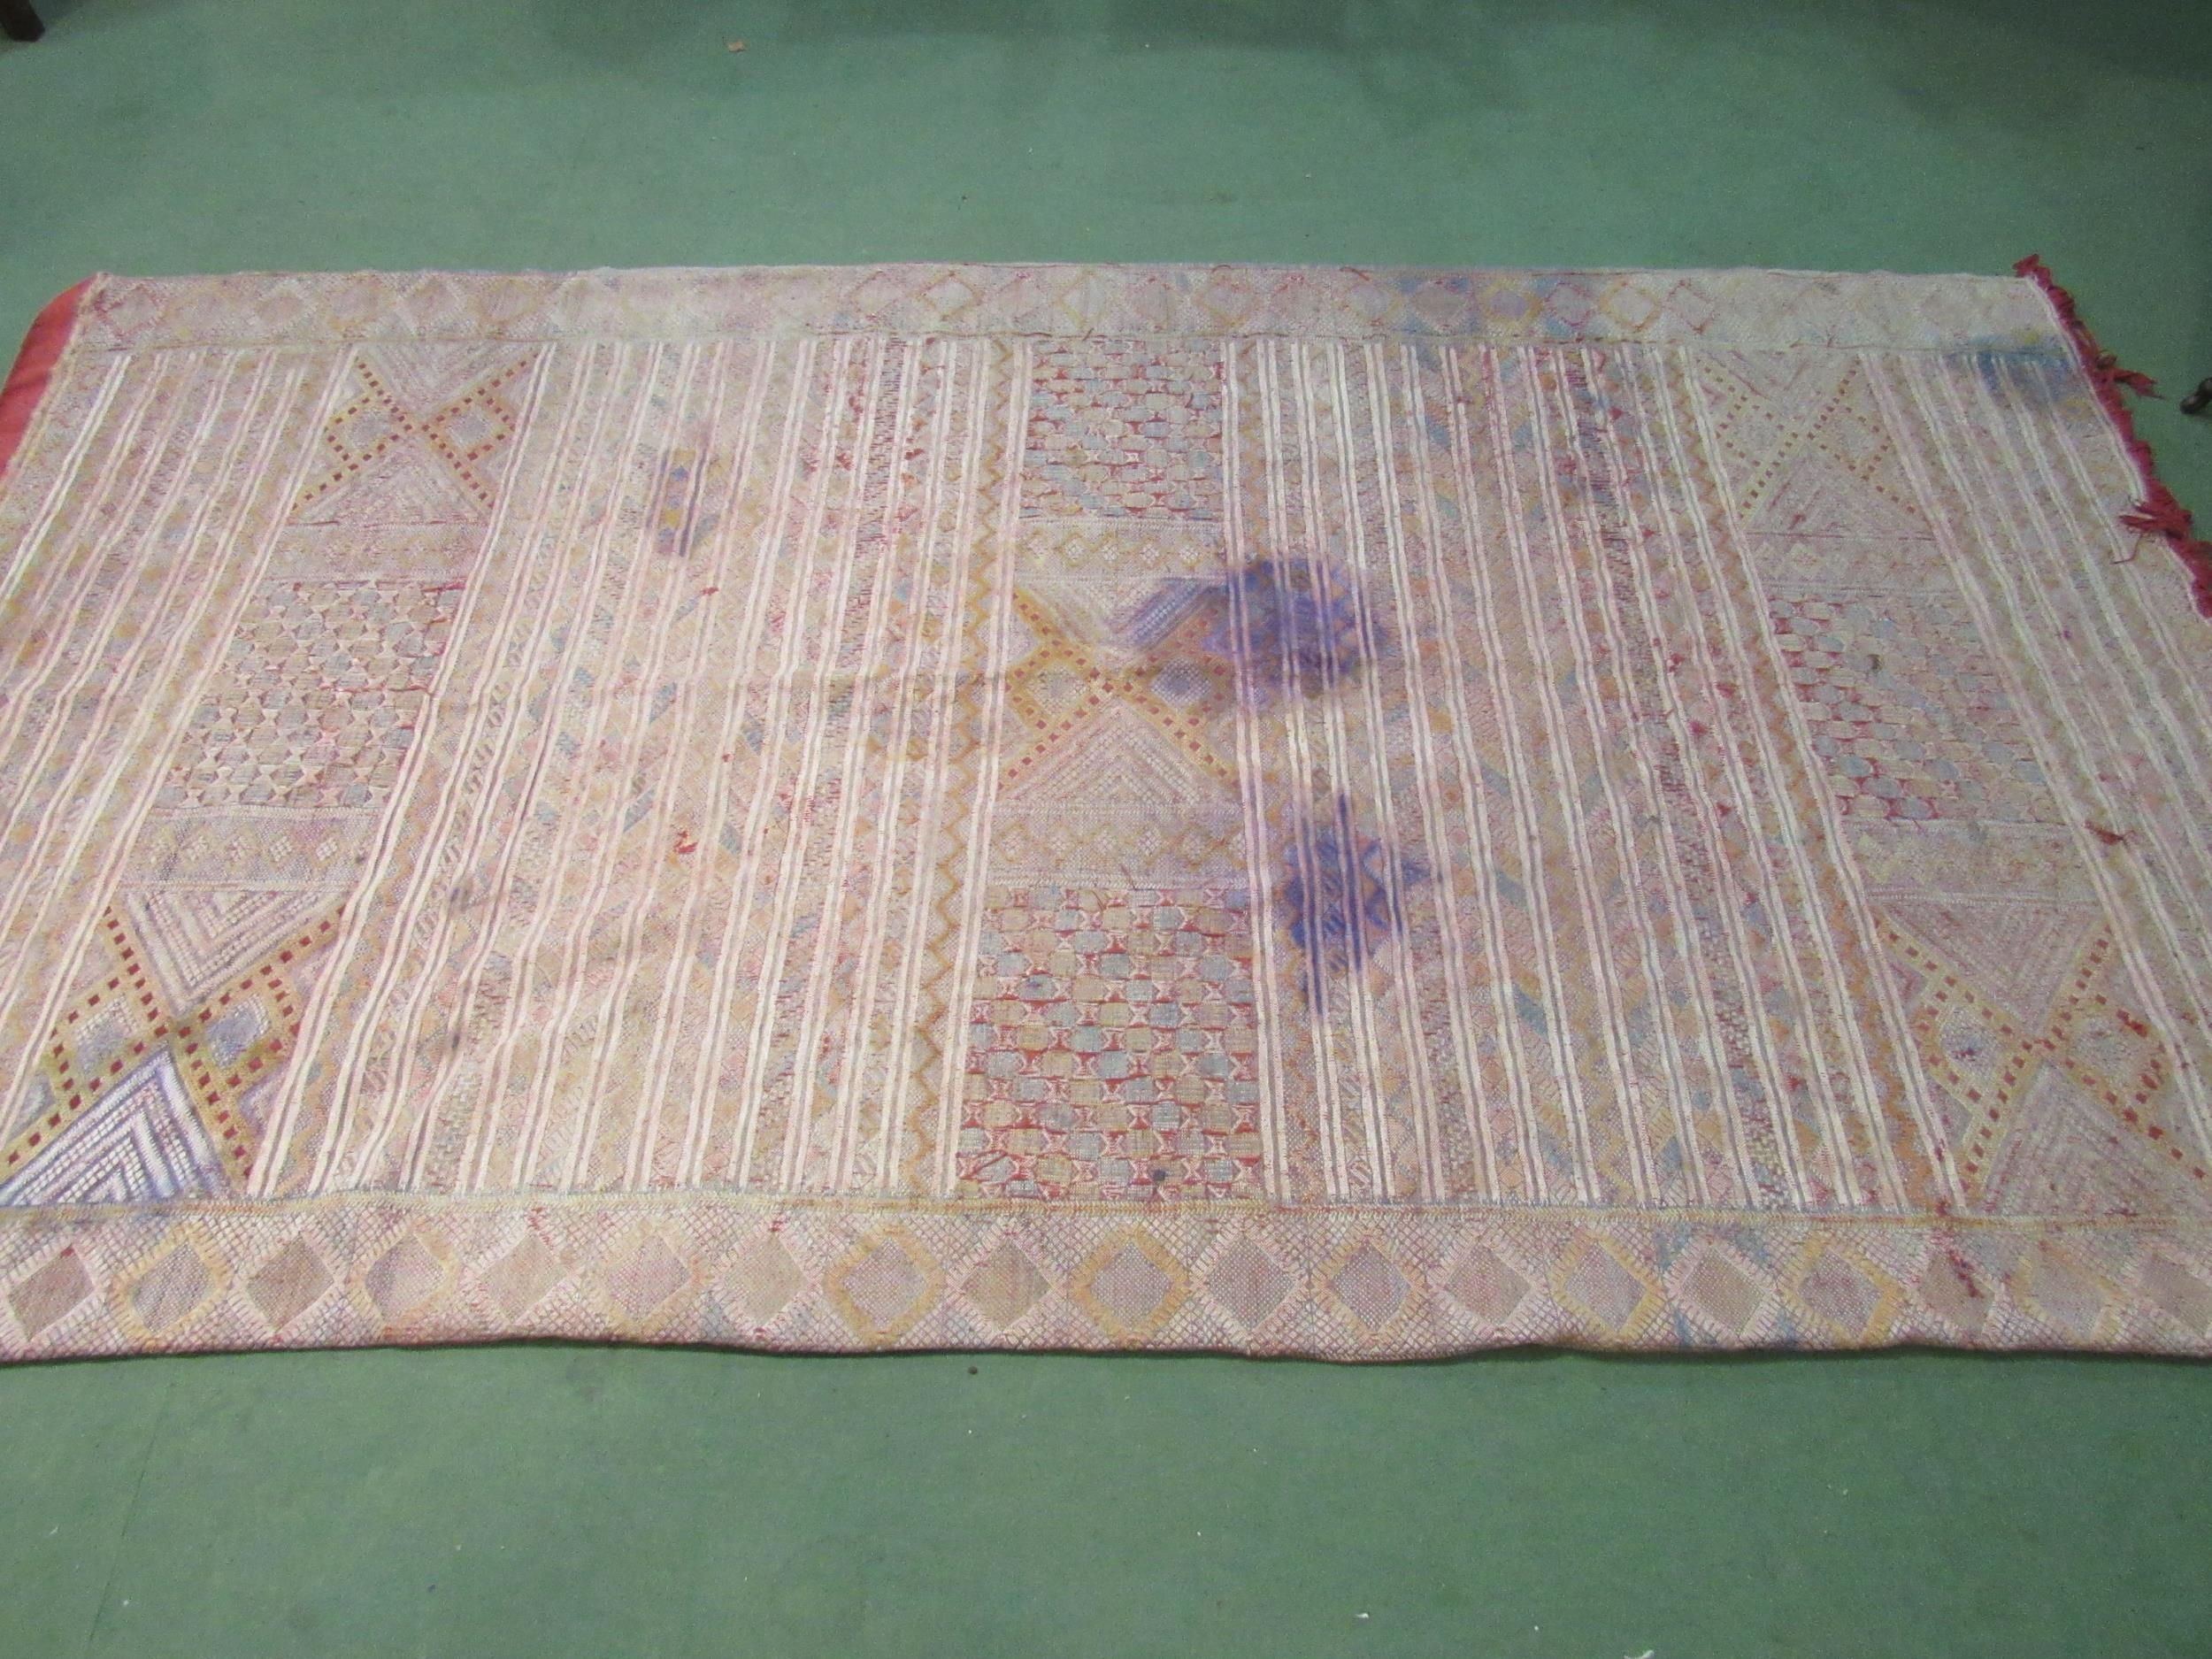 An Eastern hand woven geometric design rug, badly stained, a/f, 316cm x 178cm - Image 6 of 6